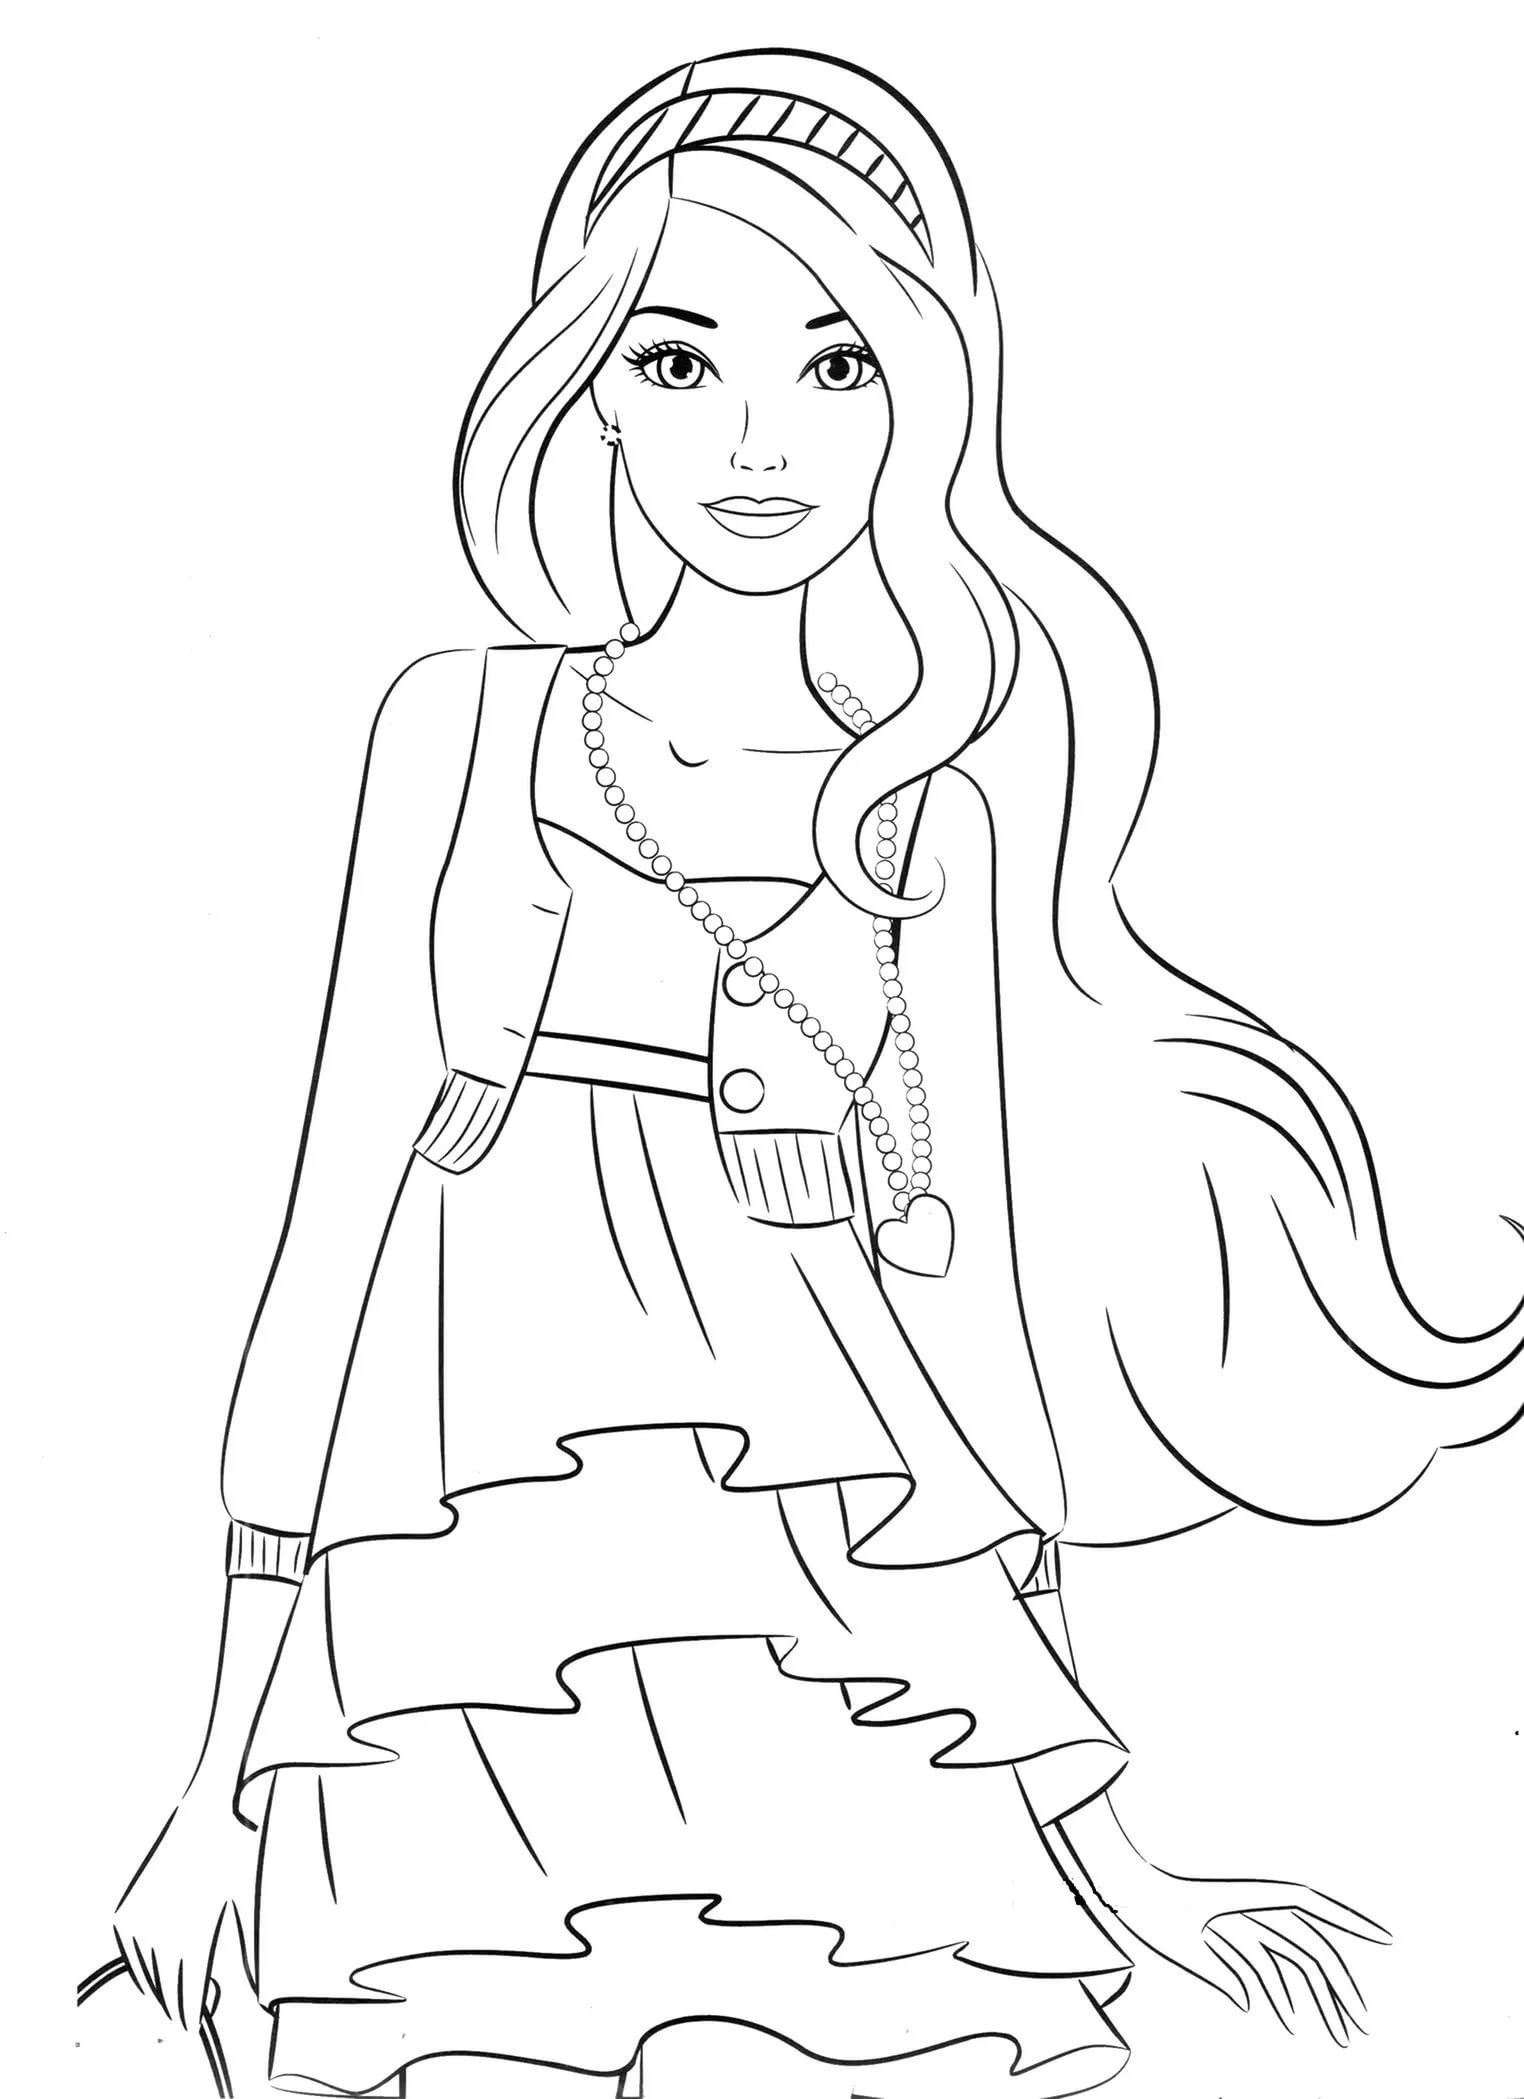 Coloring Sheets For Girls
 Coloring pages for 8 9 10 year old girls to and